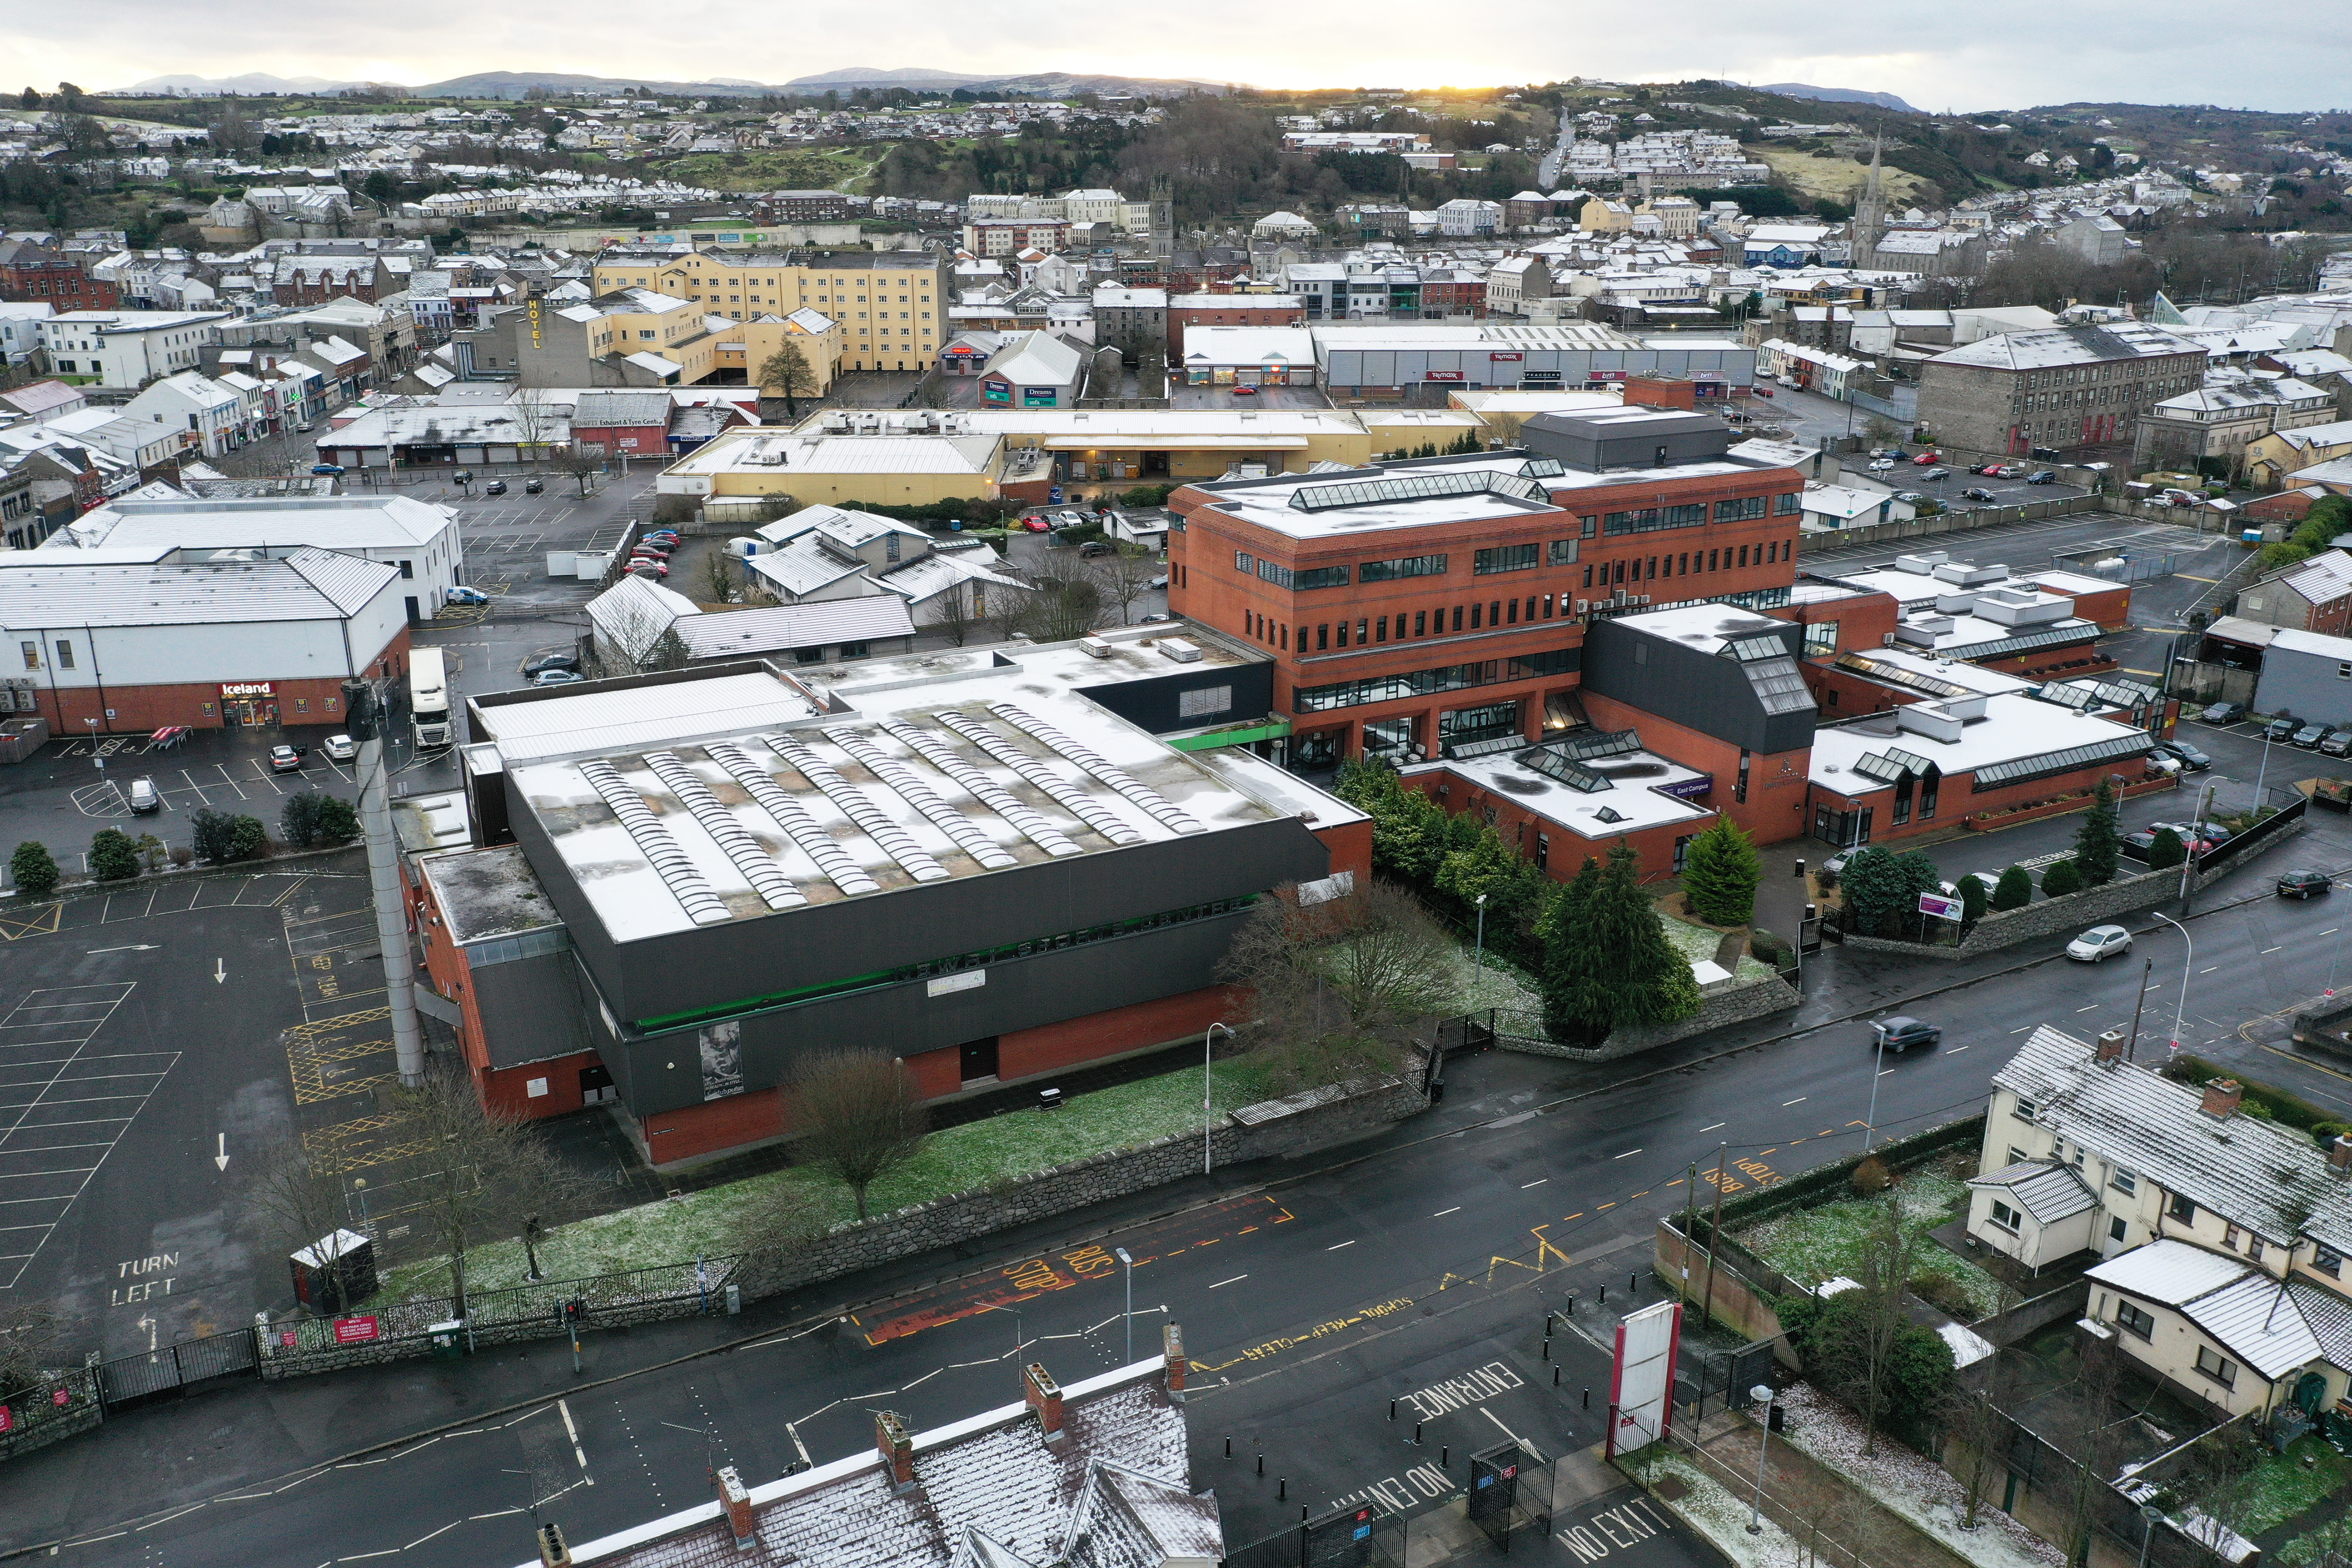 Newry East campus